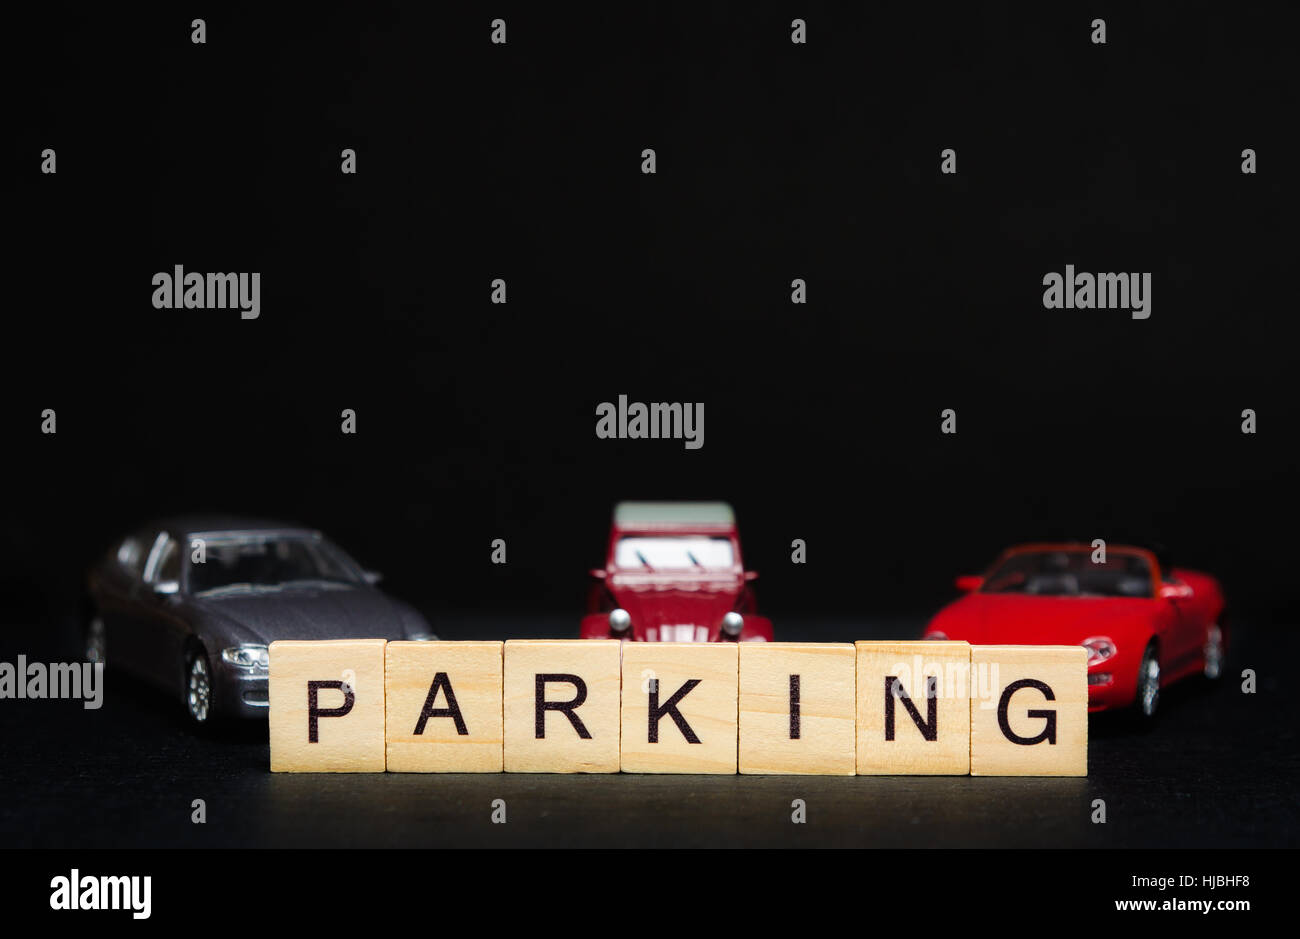 PARKING word written on wood blocks and toys cars in background Stock Photo